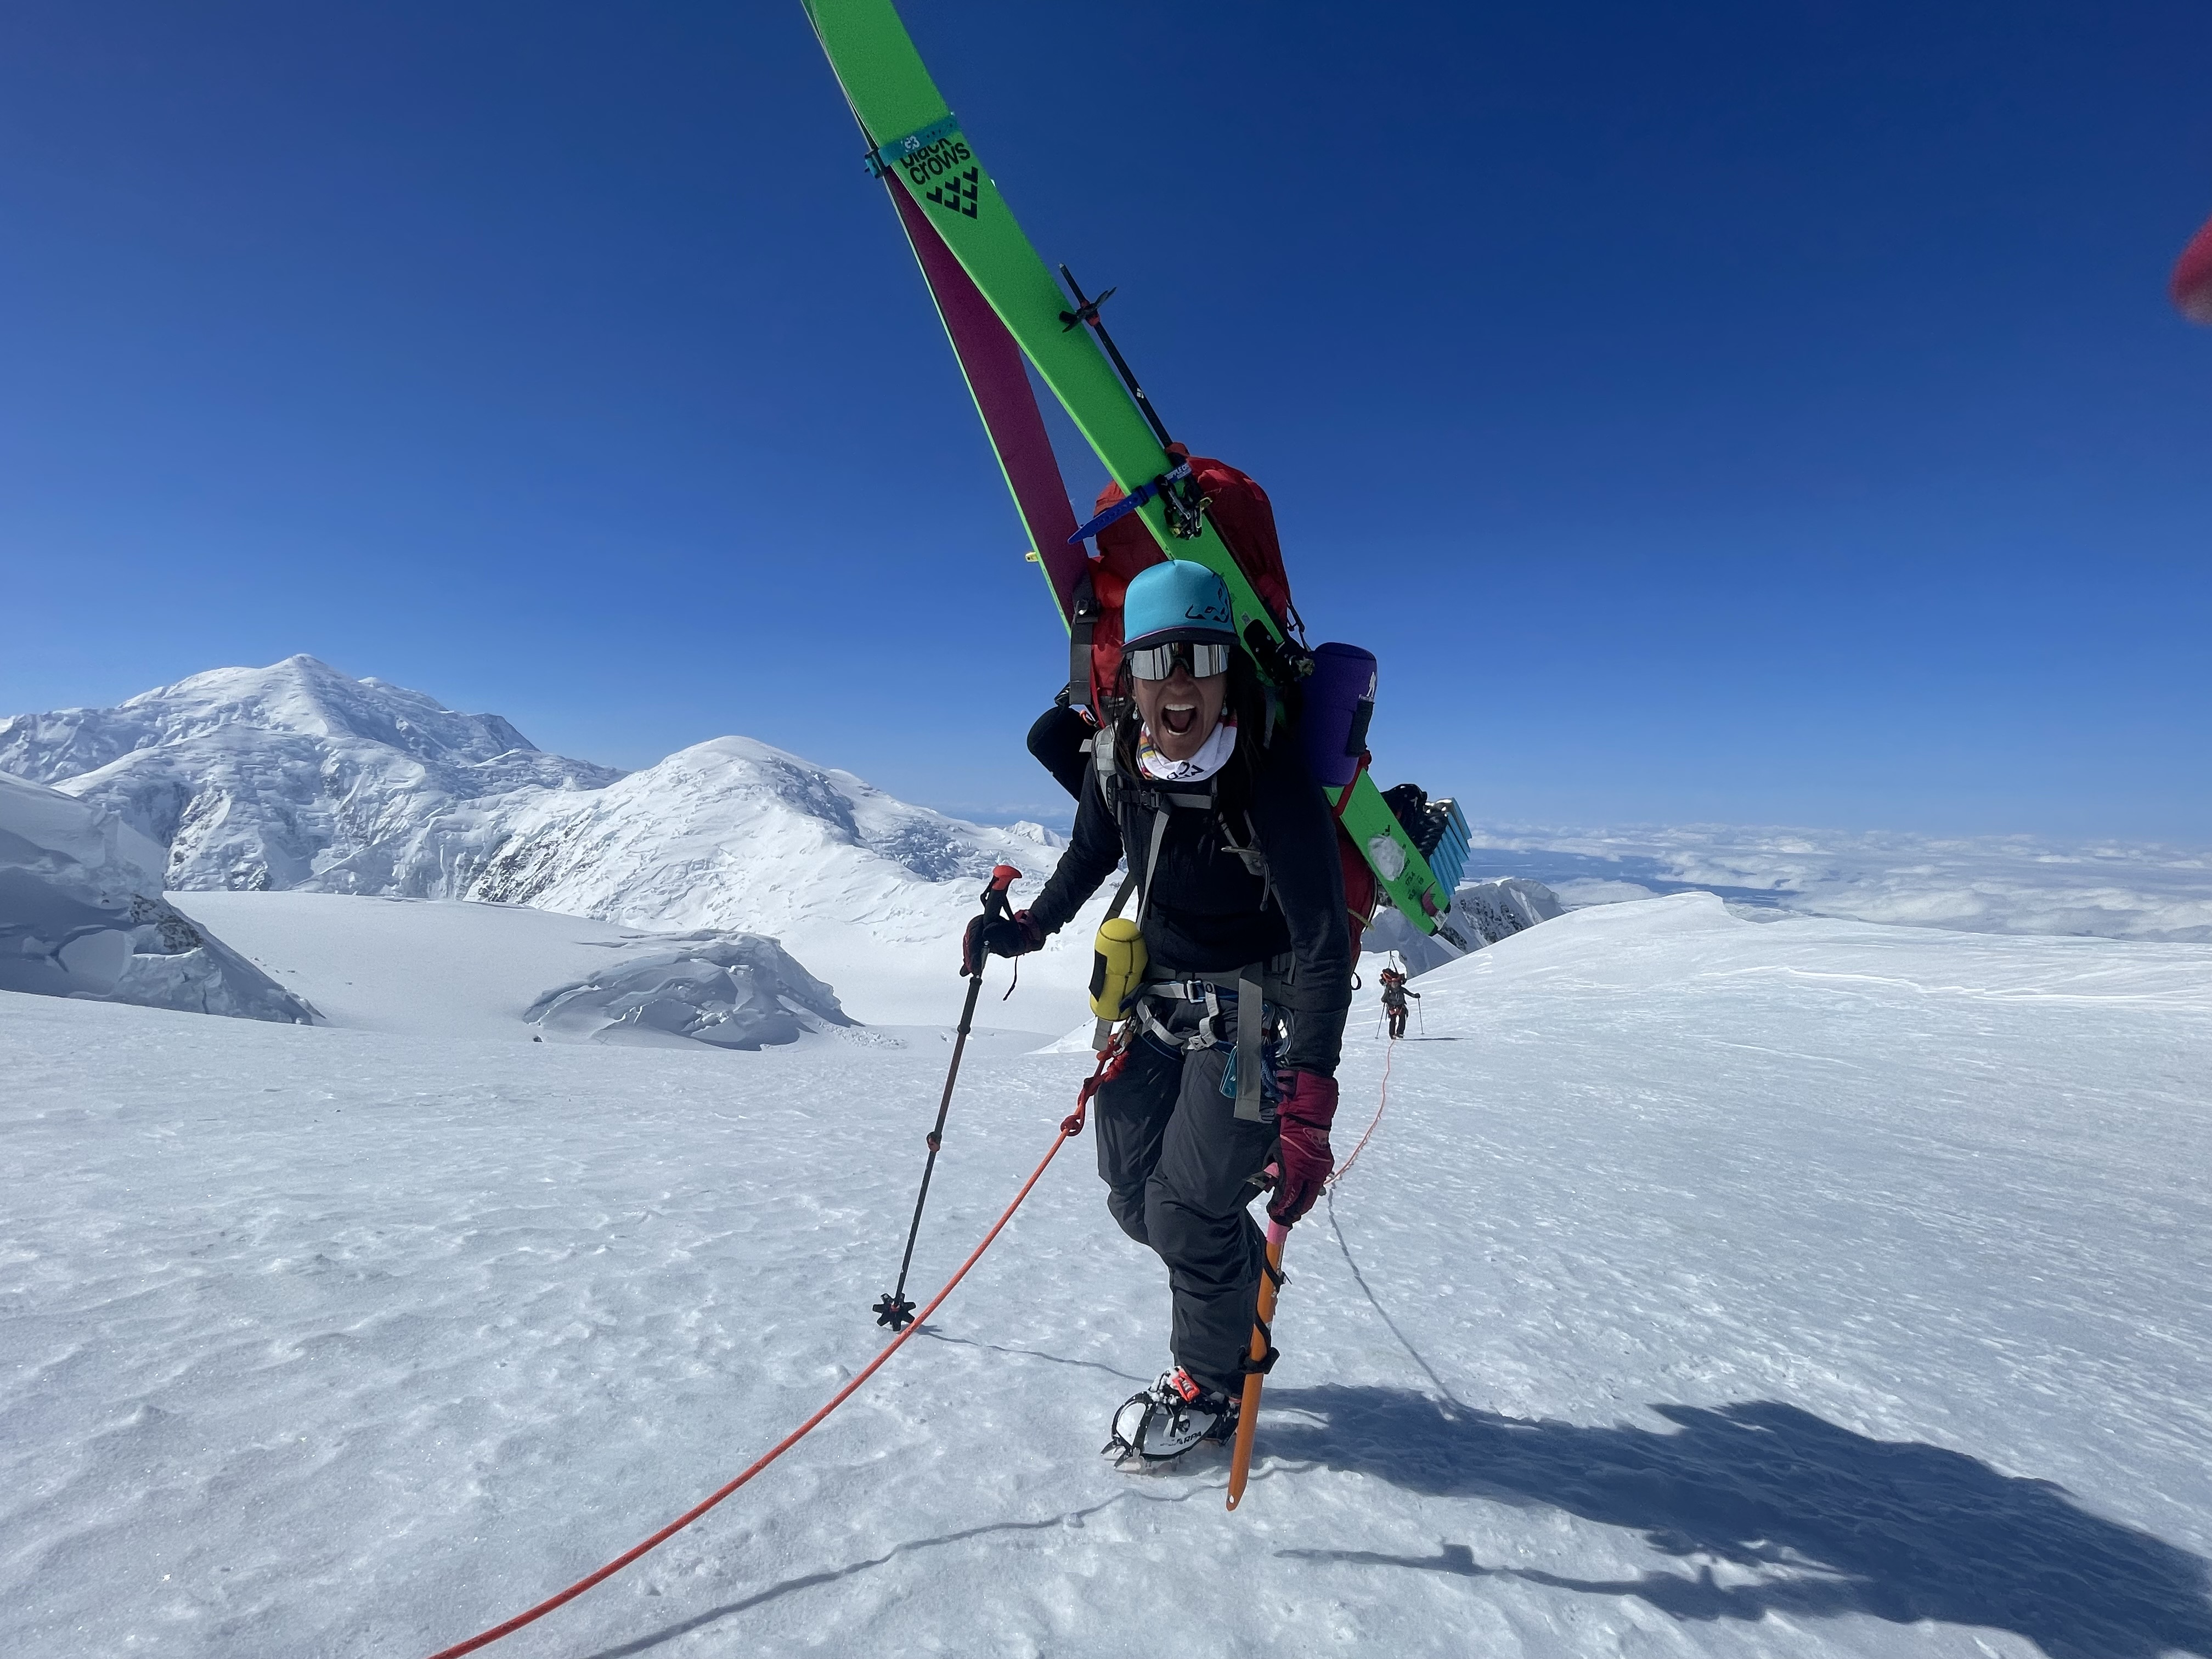 A woman with a huge smile climbs up a mountain slope carrying a huge backback with skis on it